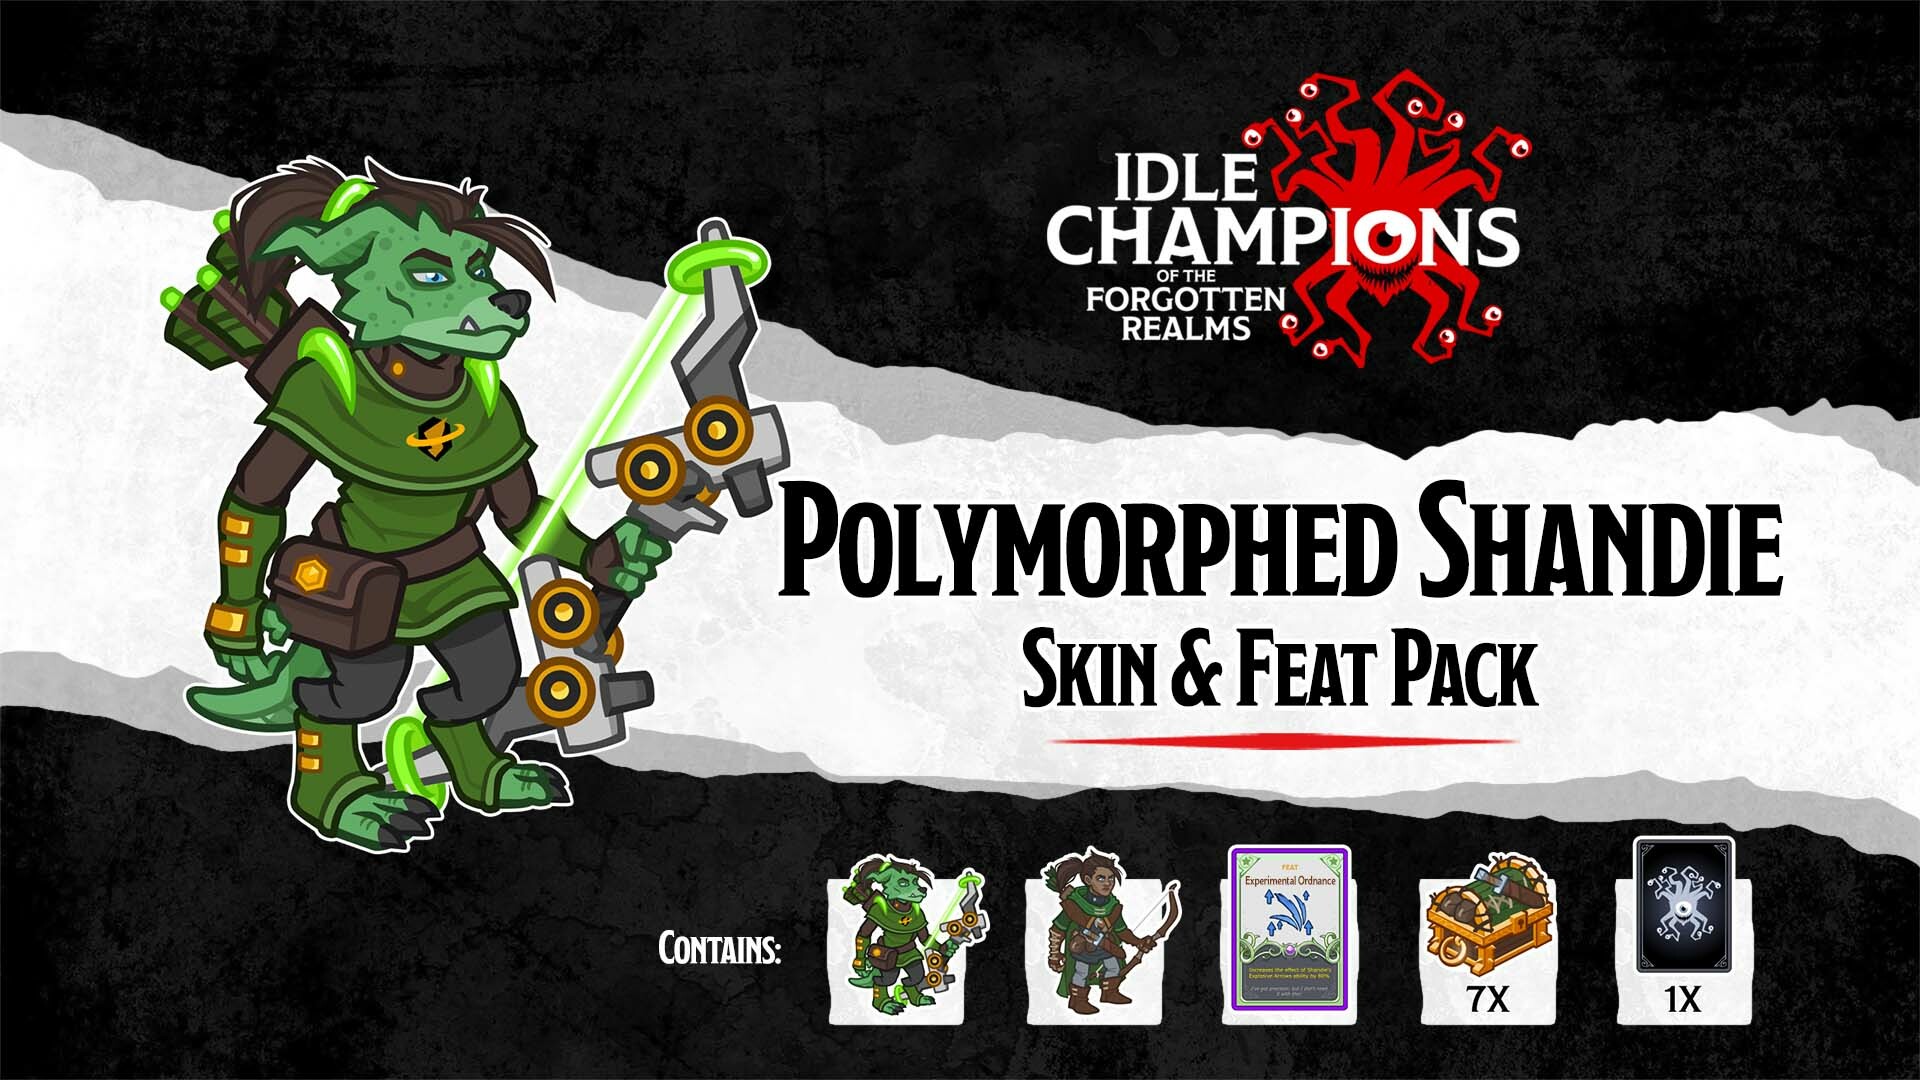 [$ 1.02] Idle Champions - Polymorphed Shandie Skin & Feat Pack DLC Steam CD Key